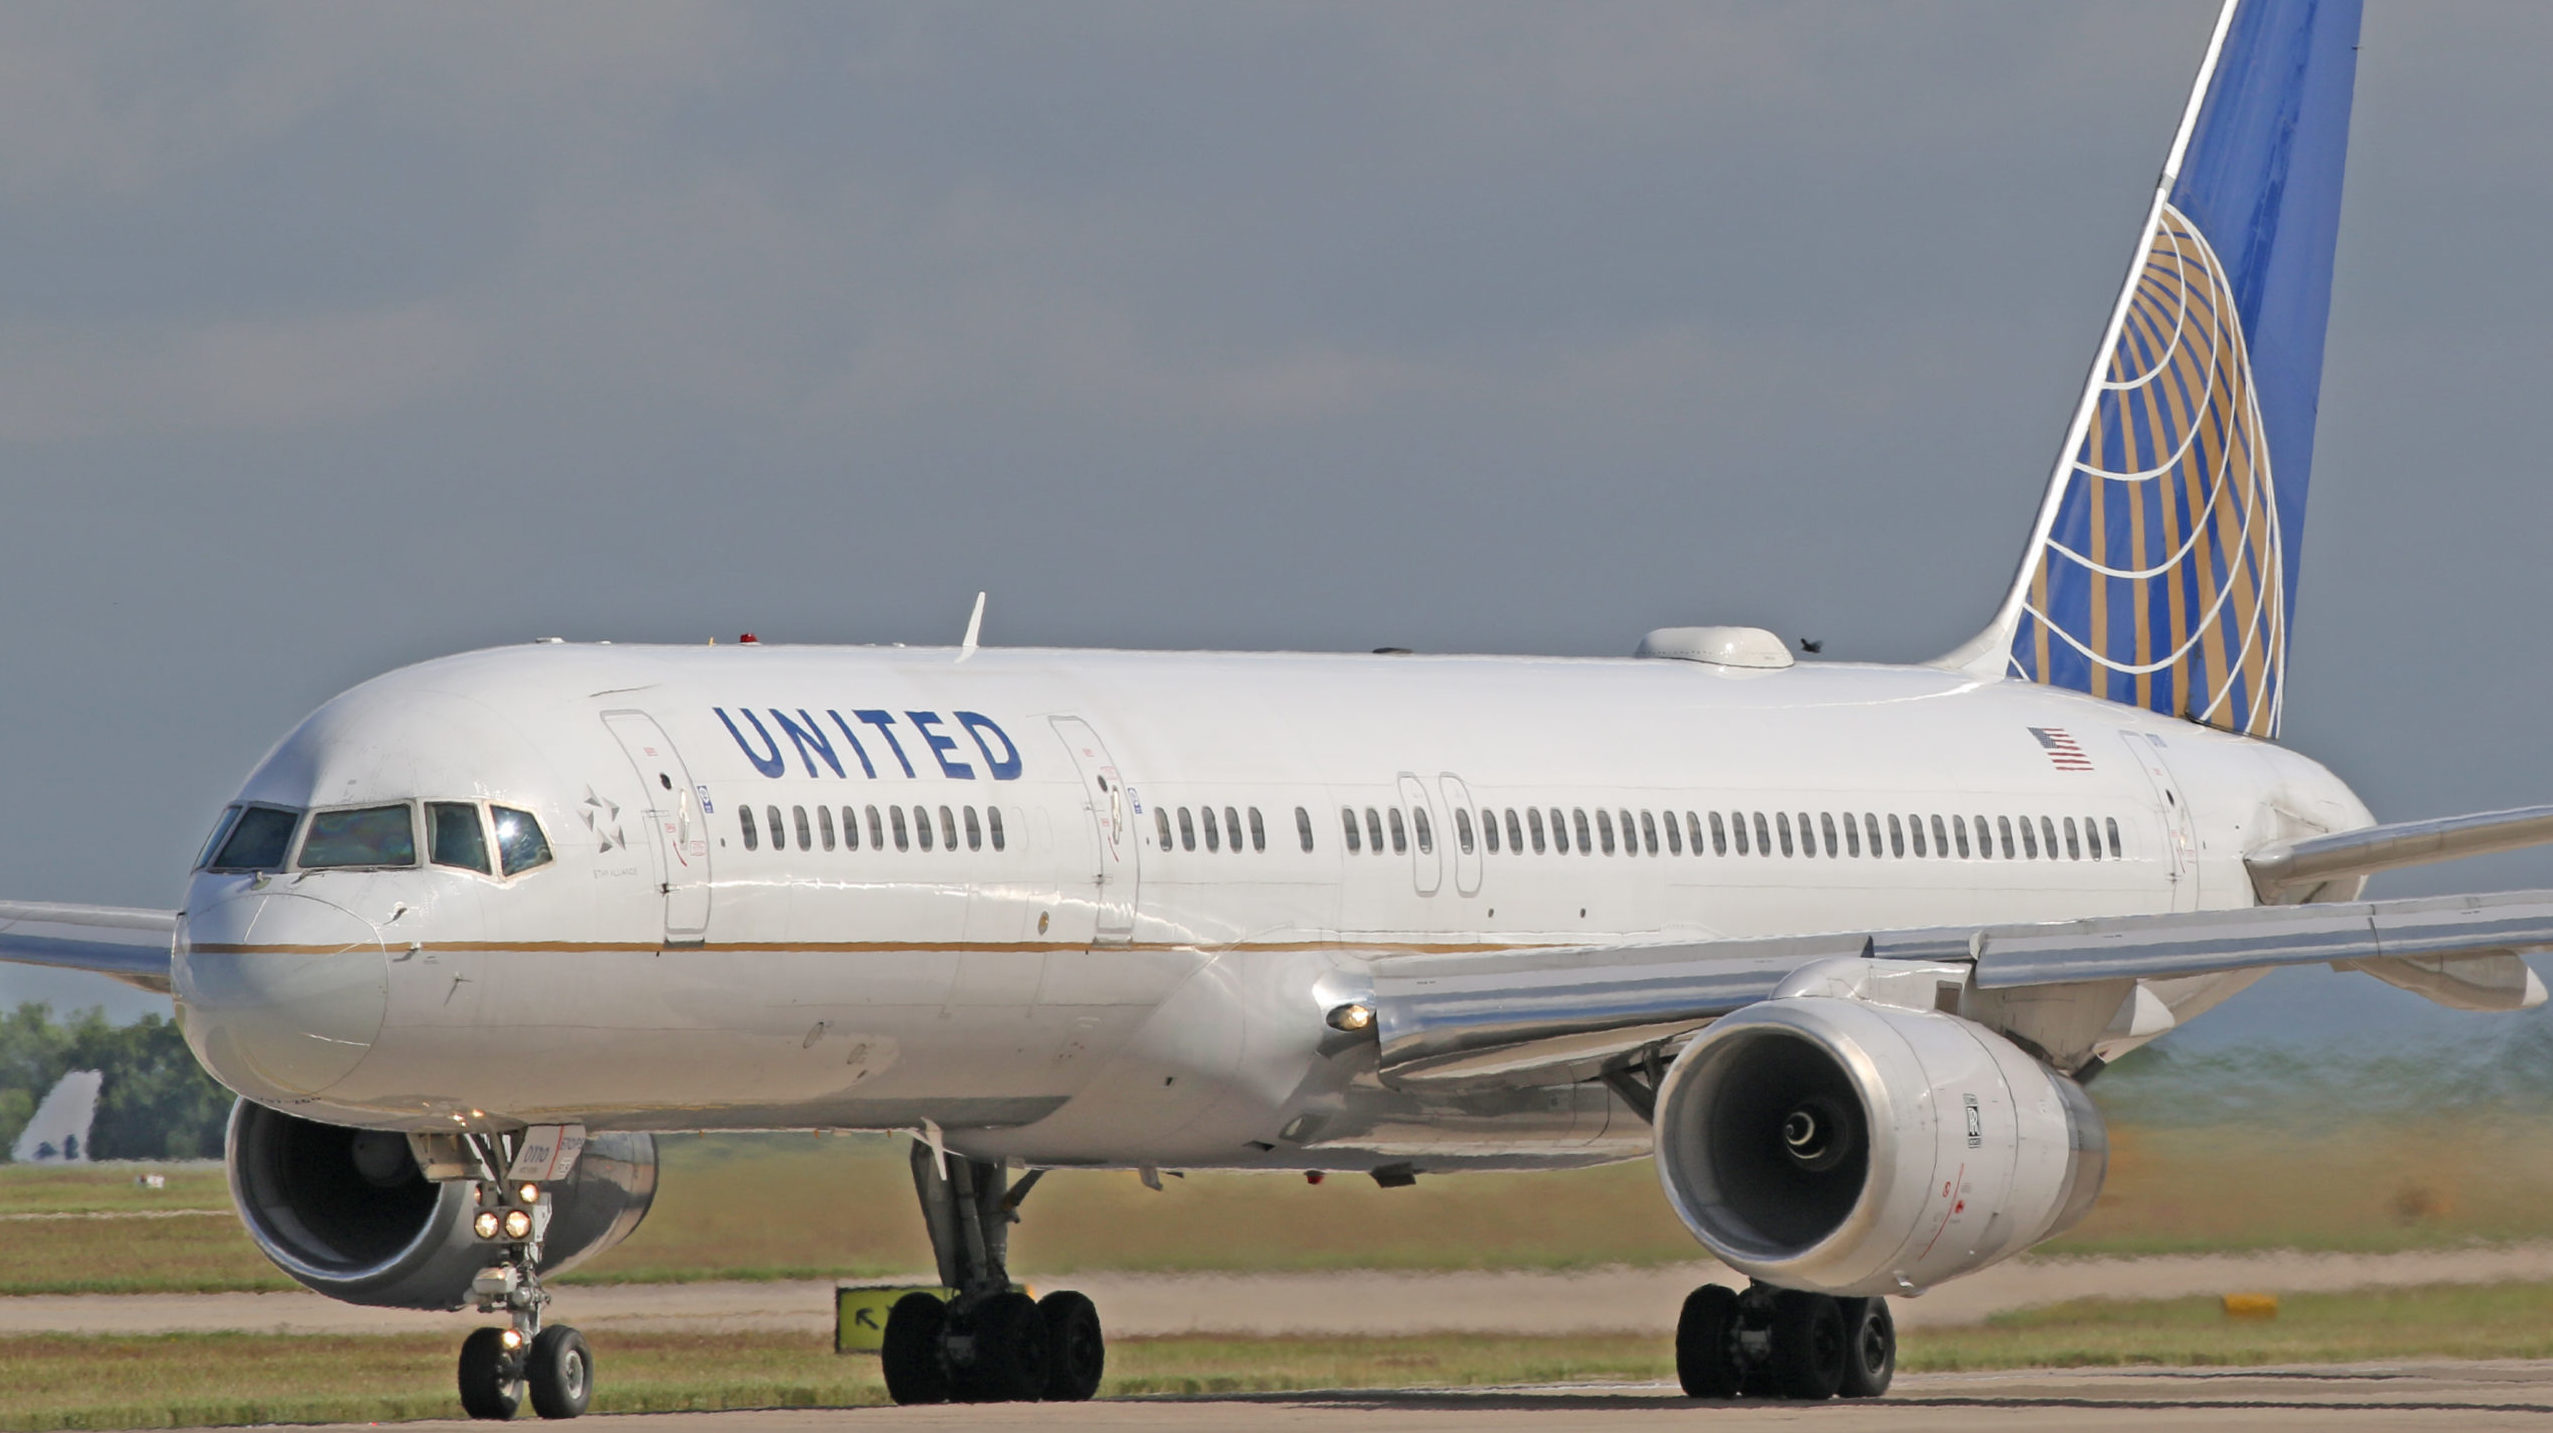 Passenger Sues United Airlines Delaying Flight to Tel Aviv After Crew Refused To Fly During Gaza Conflict